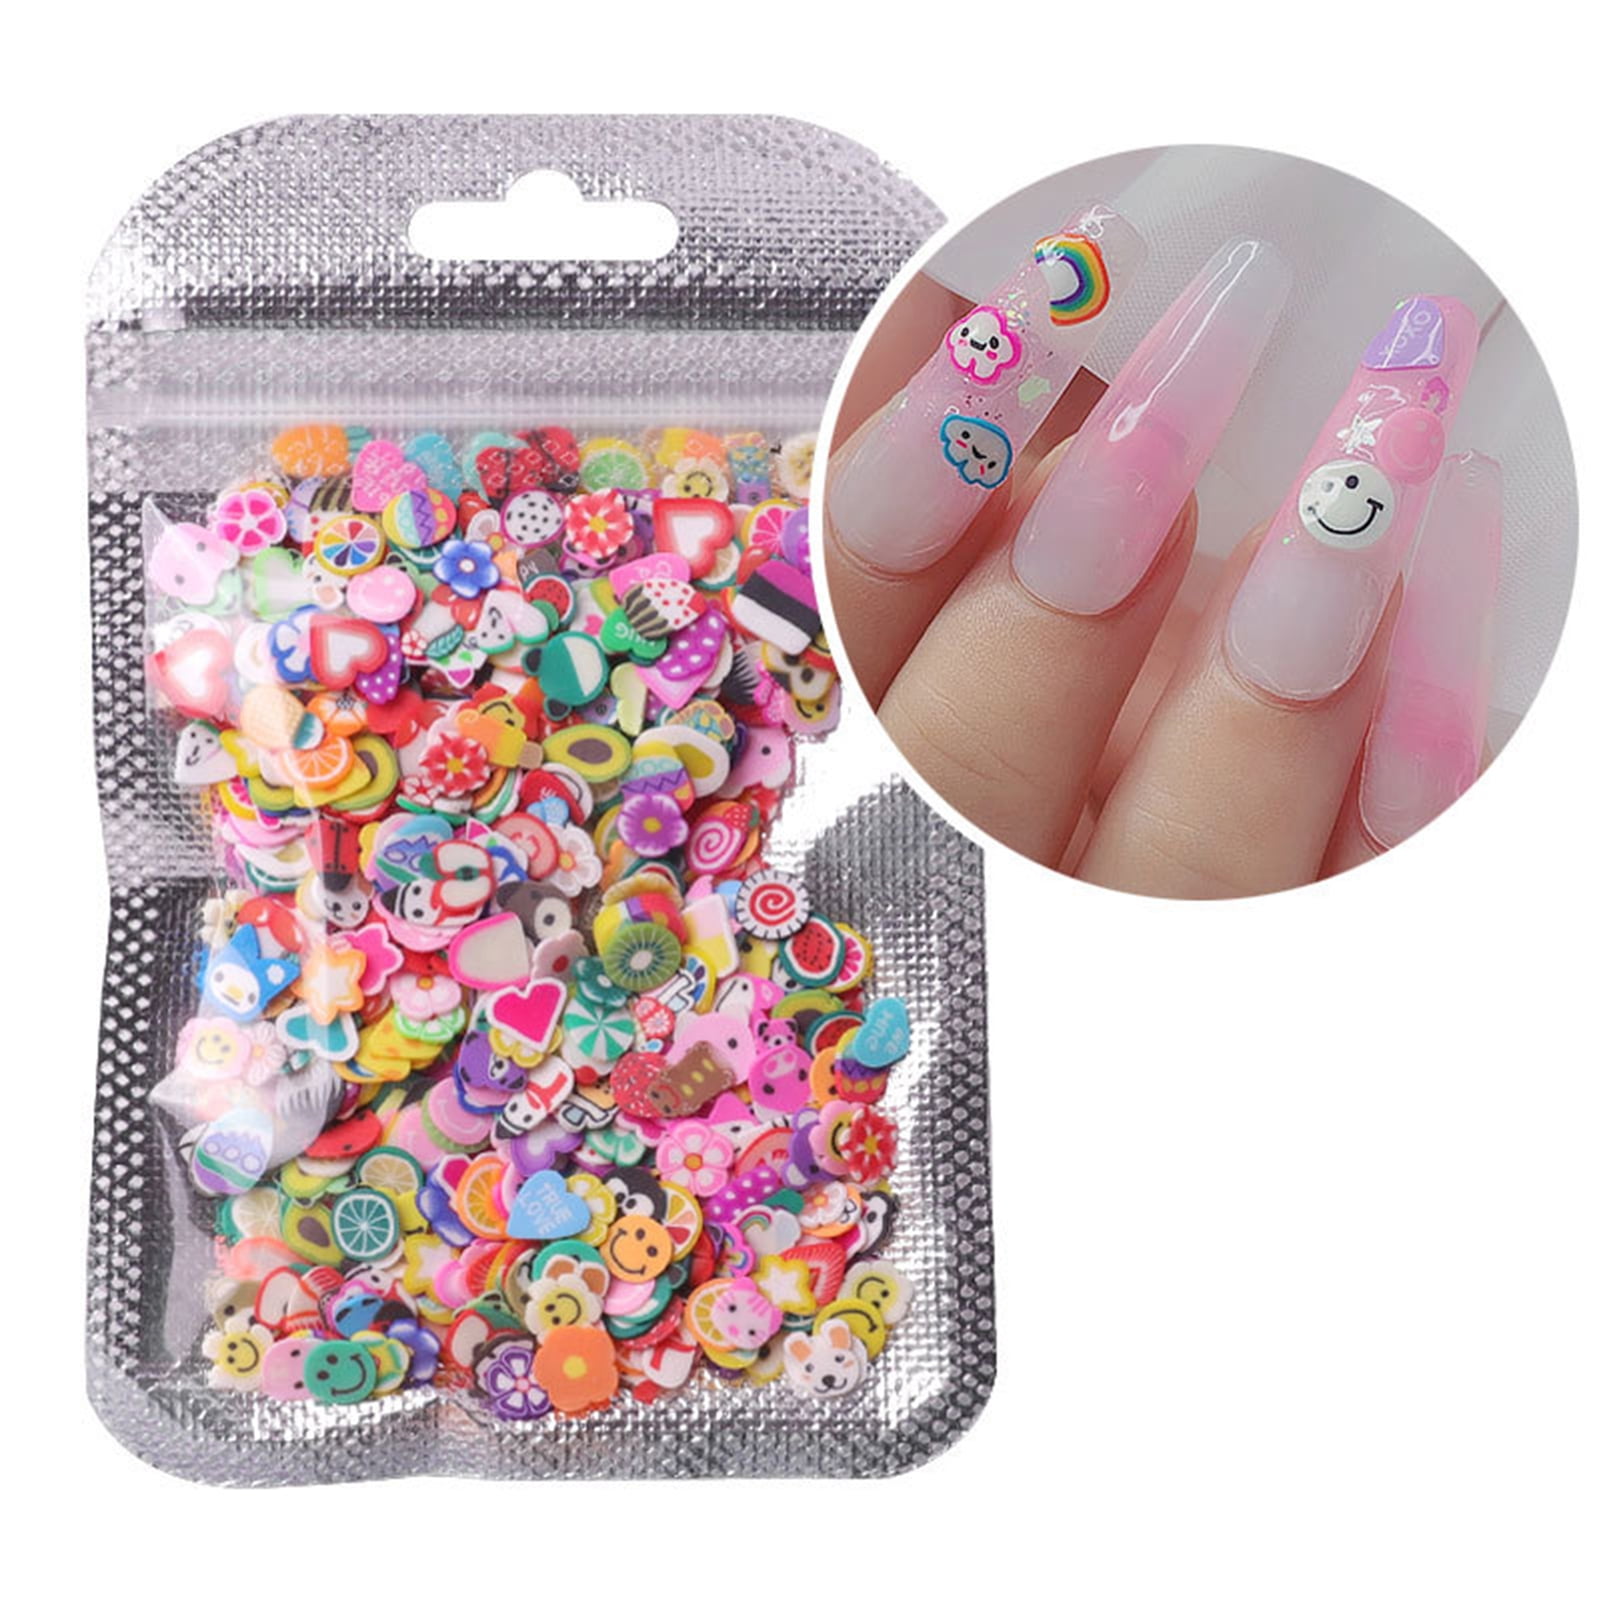 50g 5mm Mixed Polymer Clay Sprinkles Colourful Mix Clay Soft Pottery Slices DIY Nail Art Decor Slime Filler Accessories (Star)